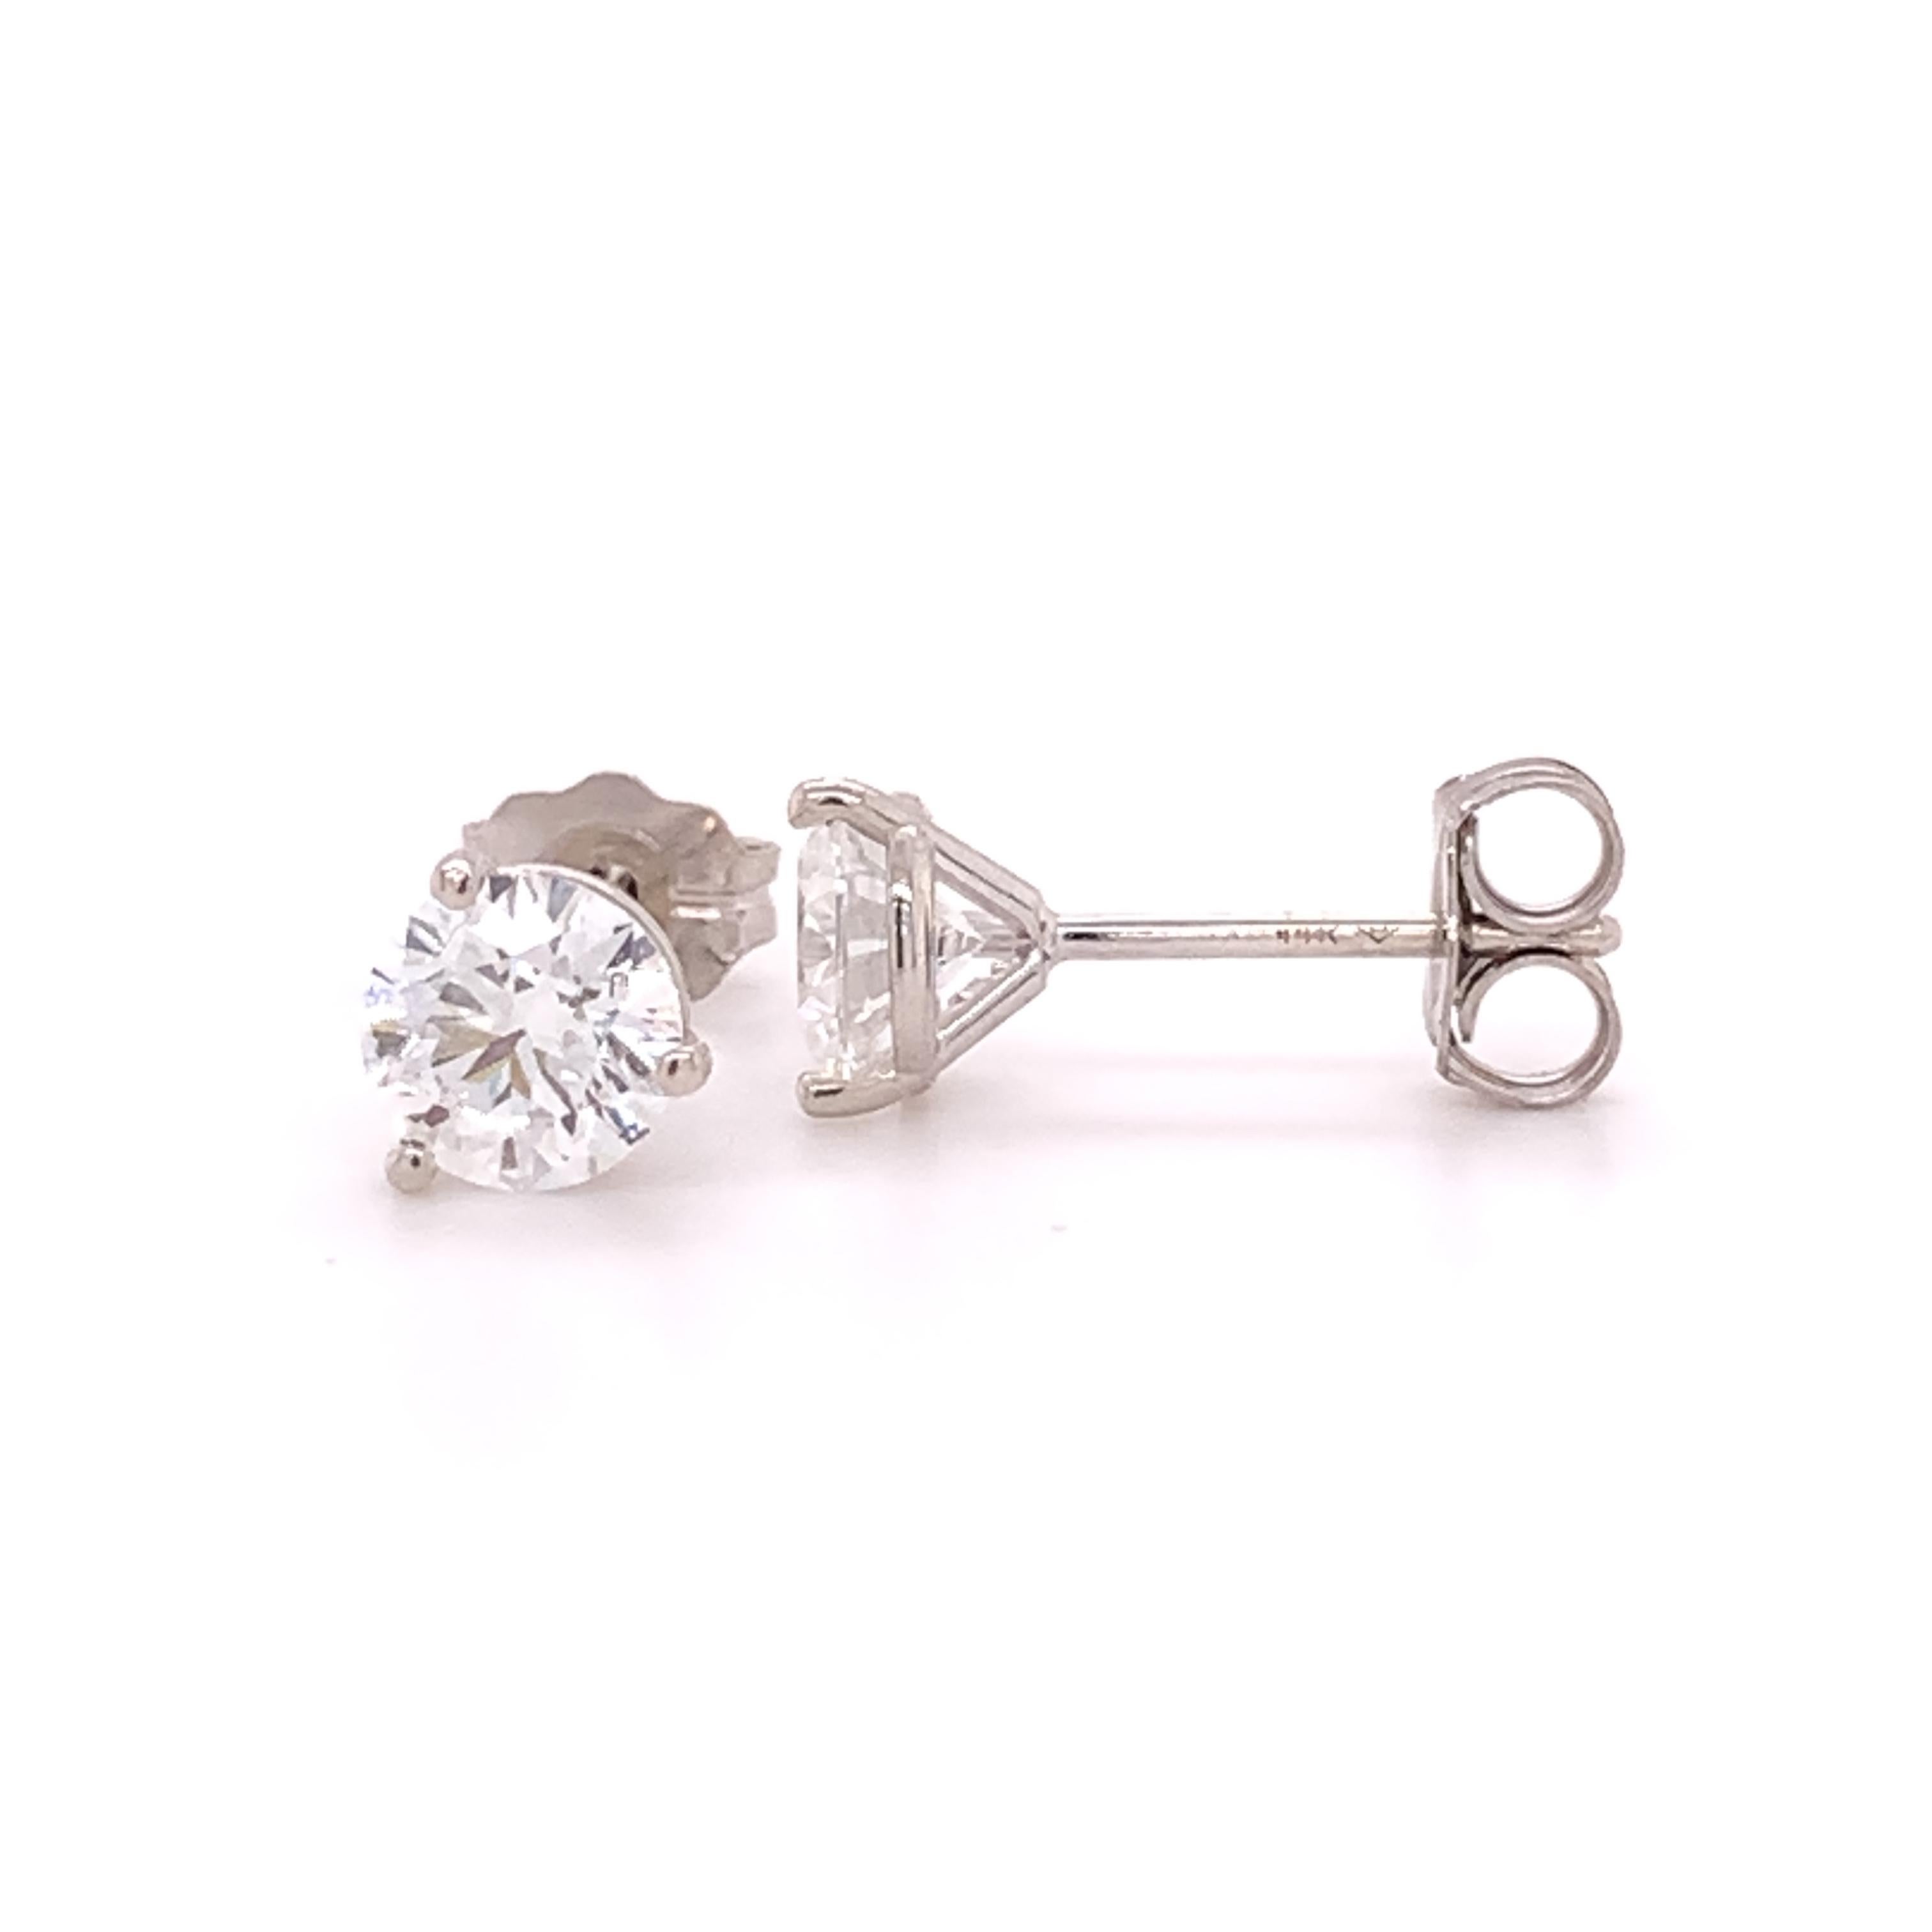 Add an elegant piece to your collection with these three prong round dazzling lab grown diamond earrings. 
(E-F color VS1-VS2 clarity) These earrings total approximately 1.0 carats and are crafted with high polished 14 karat white gold with push